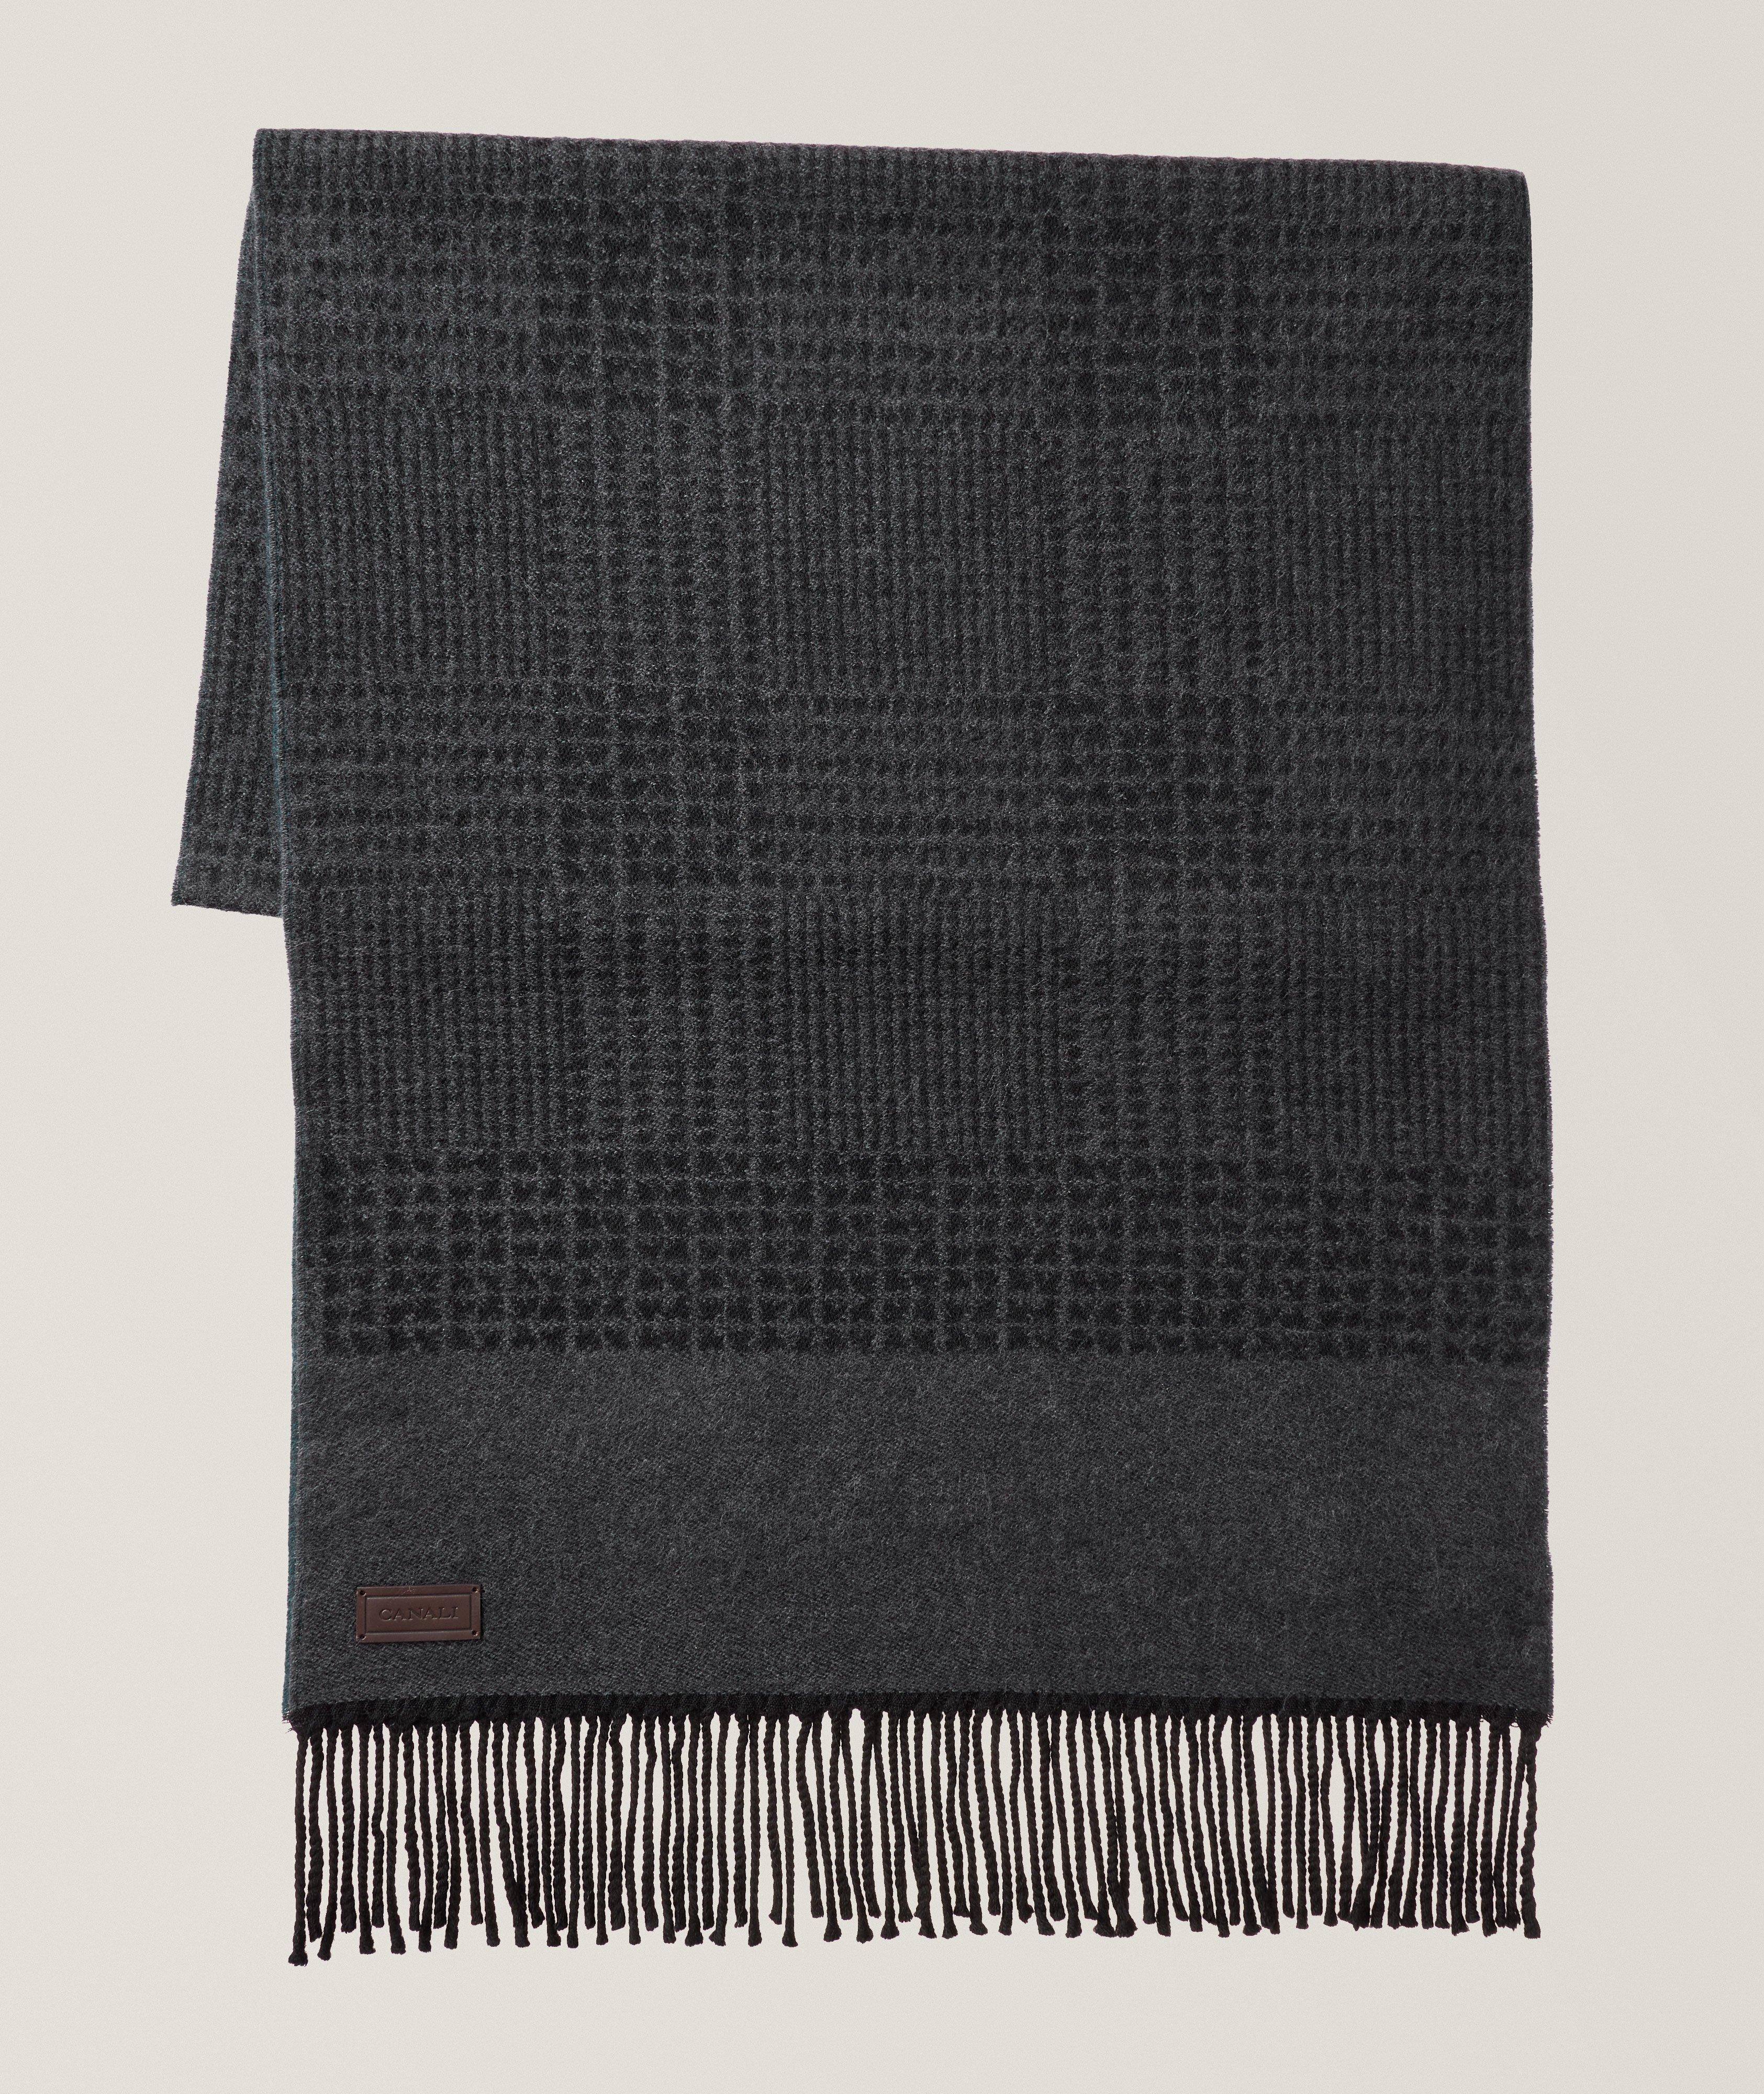 Fringed Checkered Wool Scarf image 0